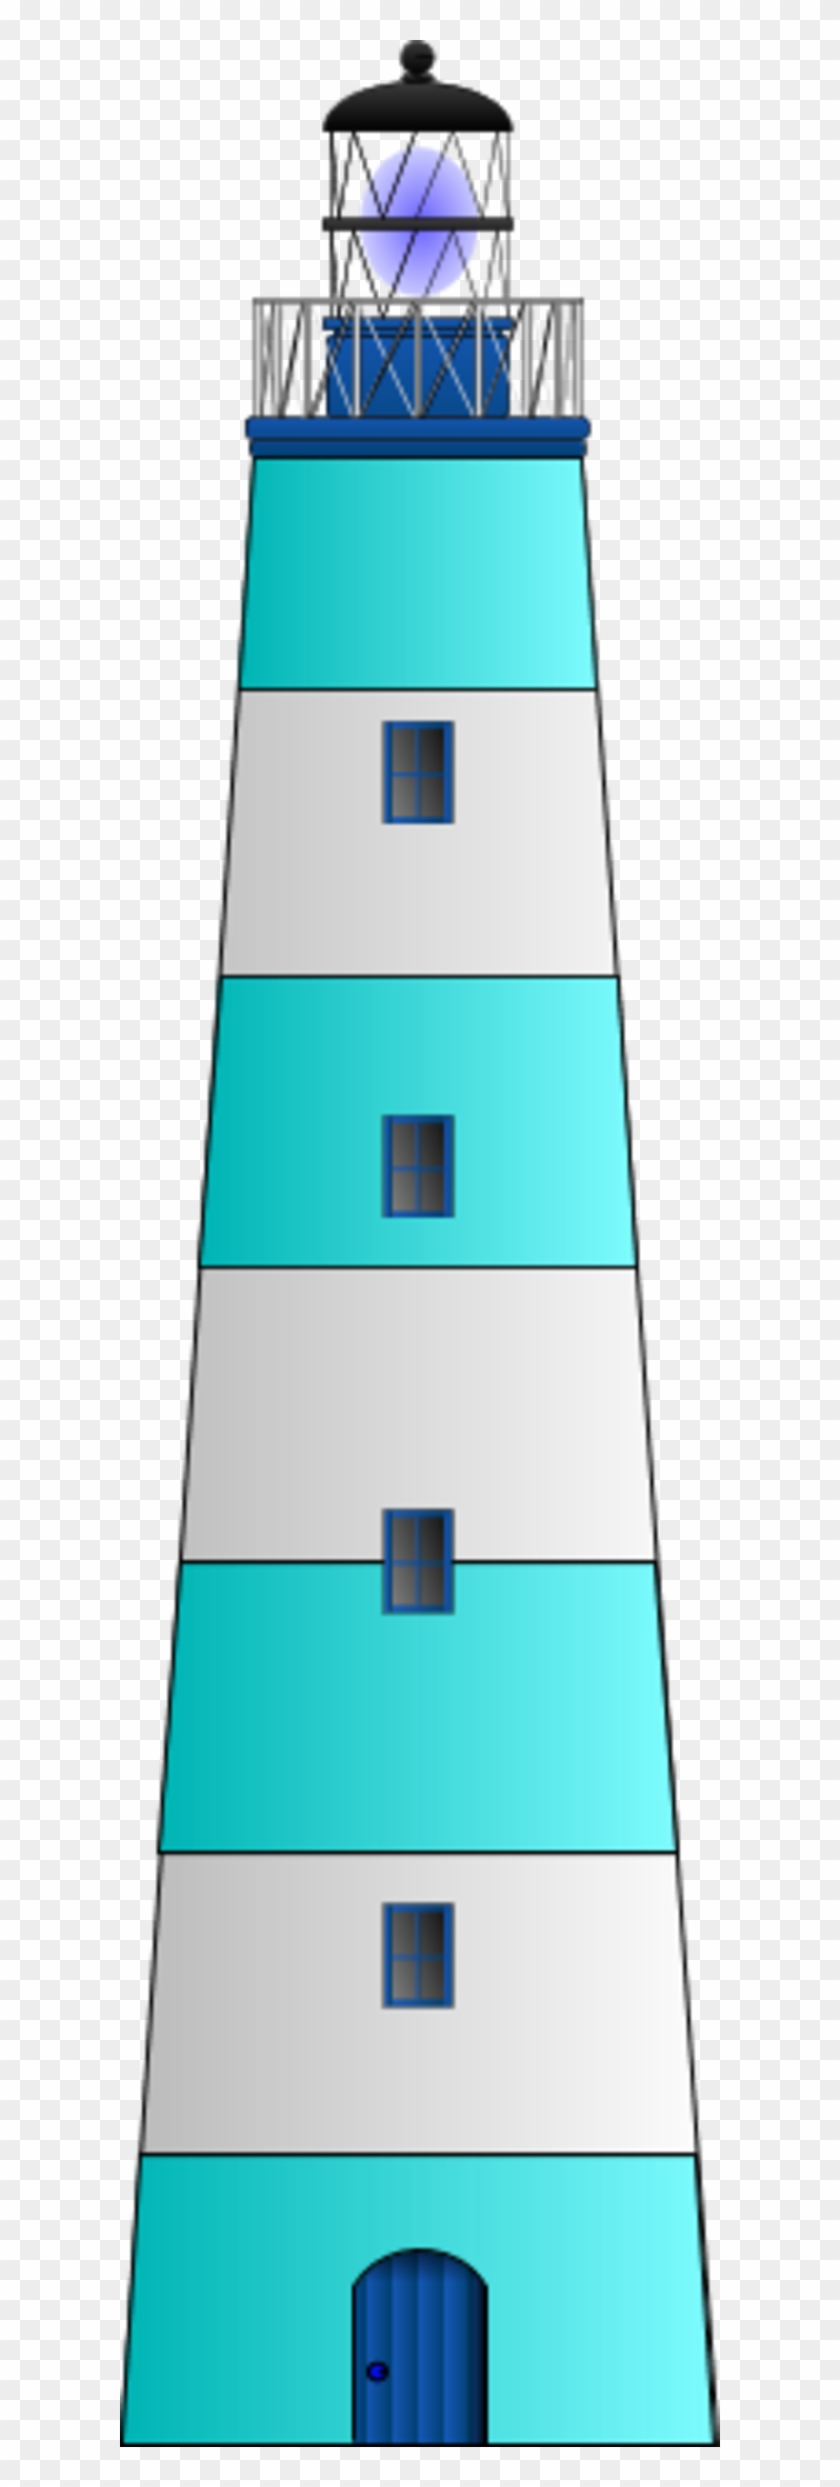 Lighthouse Building Cliparts - Blue Lighthouse Clipart #444582